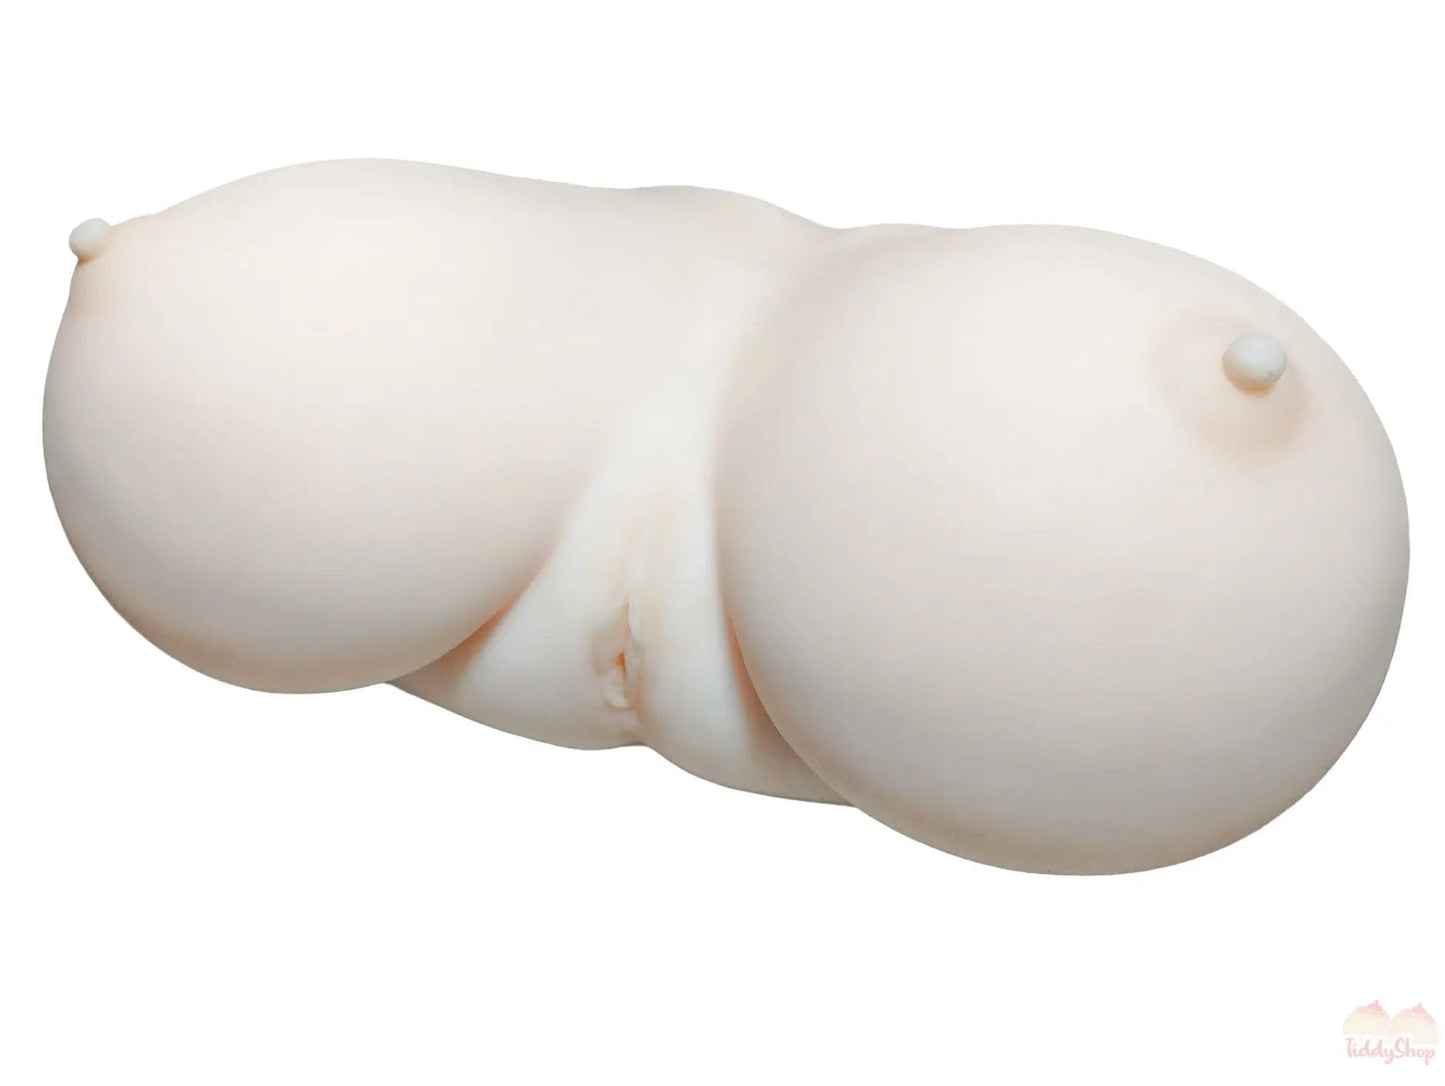 TiddyShop JelloJiggles Tiddies 25lbs / 11.5kg Big Fat Tits with OPTIONAL Integrated Onahole with Vagina and Anus - Busty Anime Sex Toy Doll - TiddyDollHouse TiddyShop